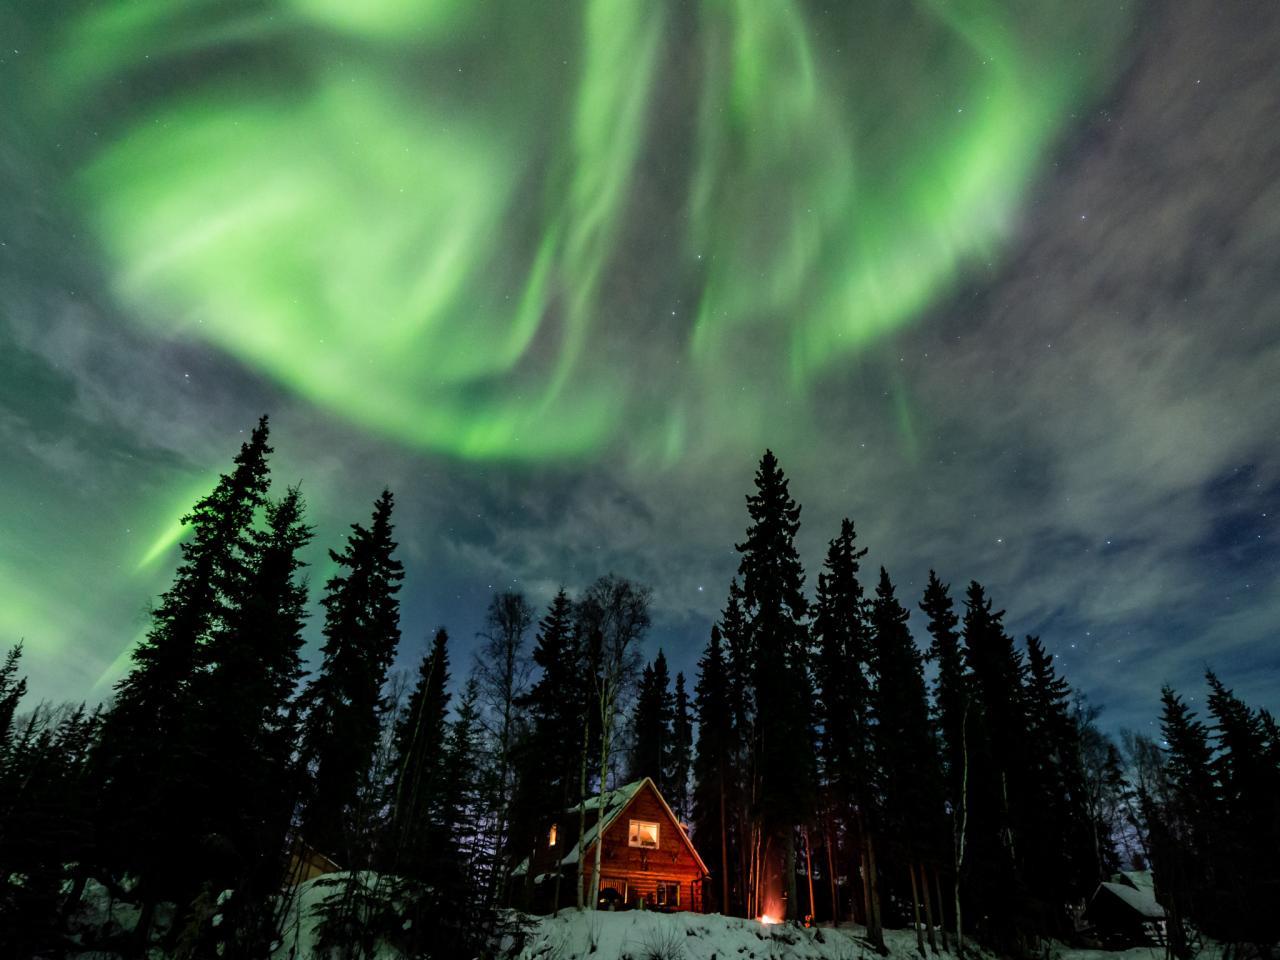 The World S Best Places To See The Northern Lights Travel Channel Blog Roam Travel Channel,Tile On Bathroom Walls Or Not